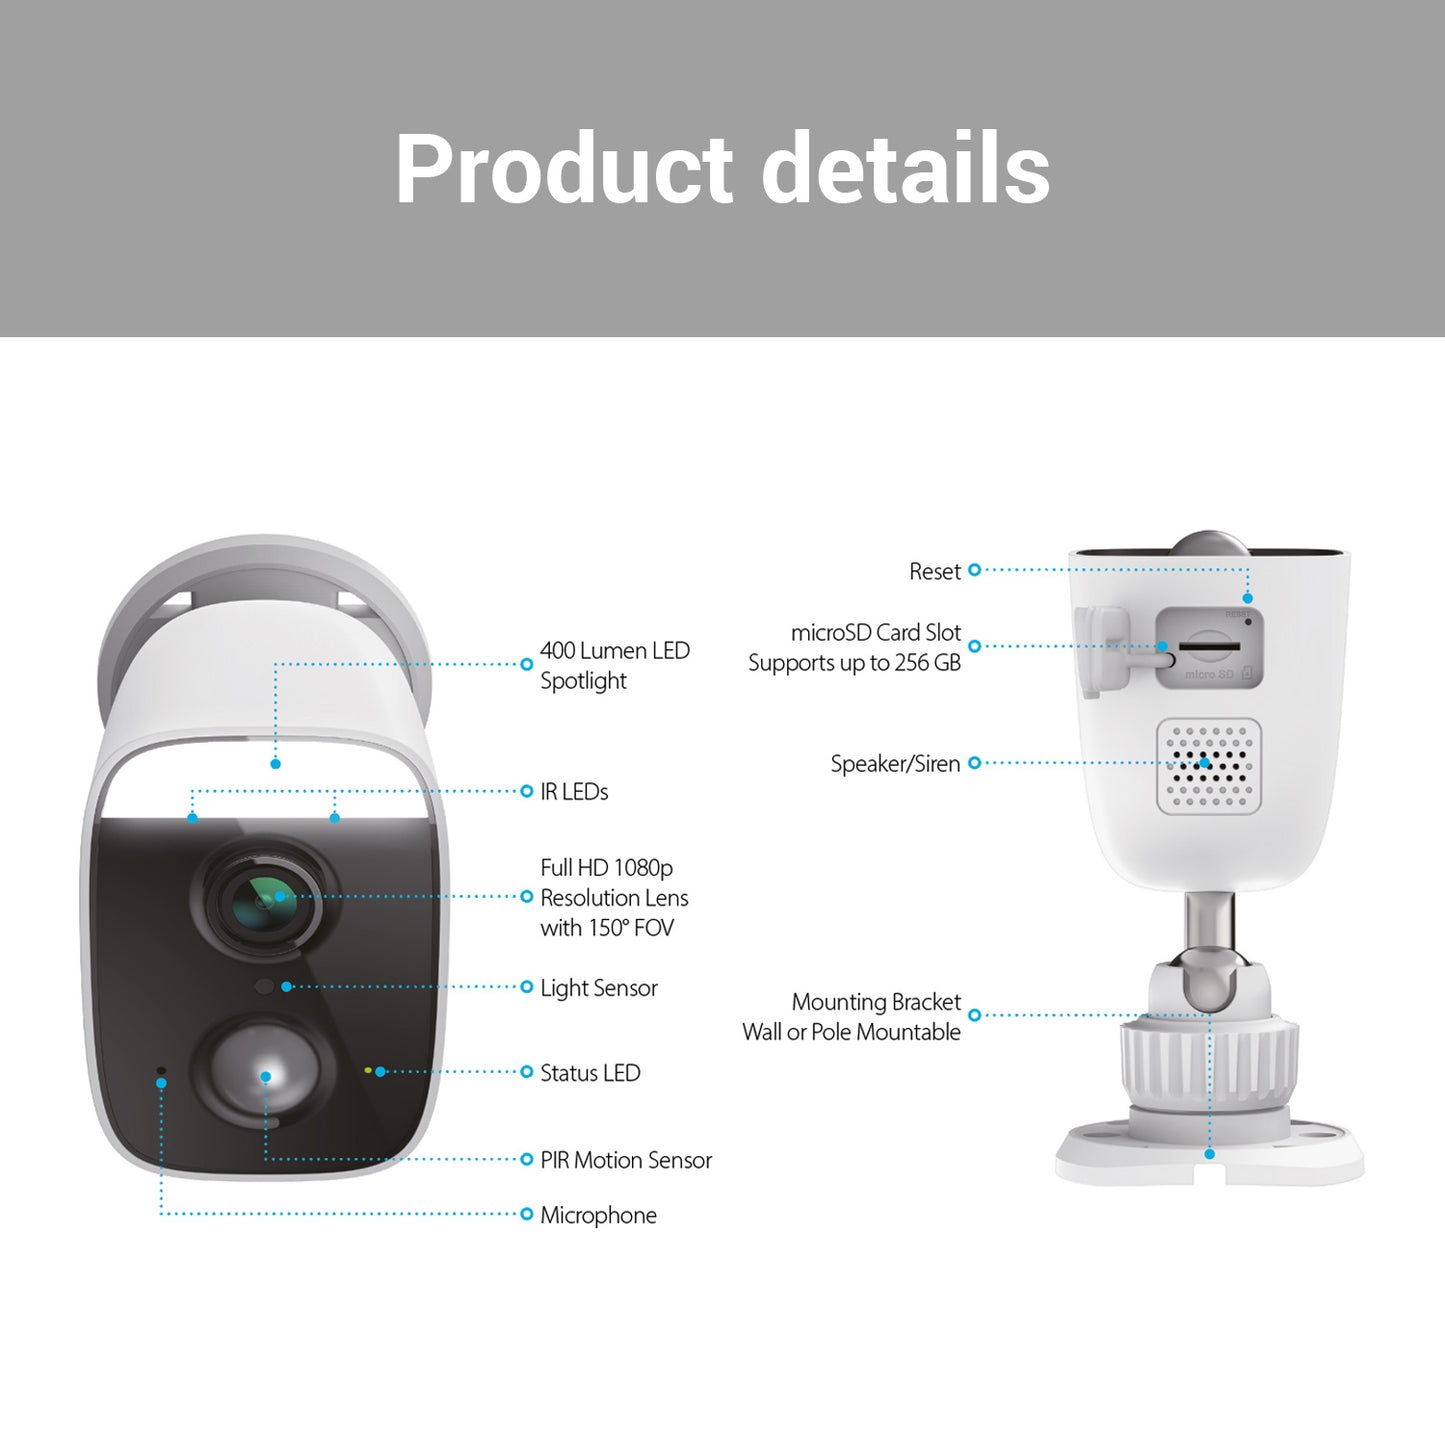 DCS-8630LH | mydlink Full HD Outdoor Wi-Fi Spotlight Camera with Built-in Smart Home Hub